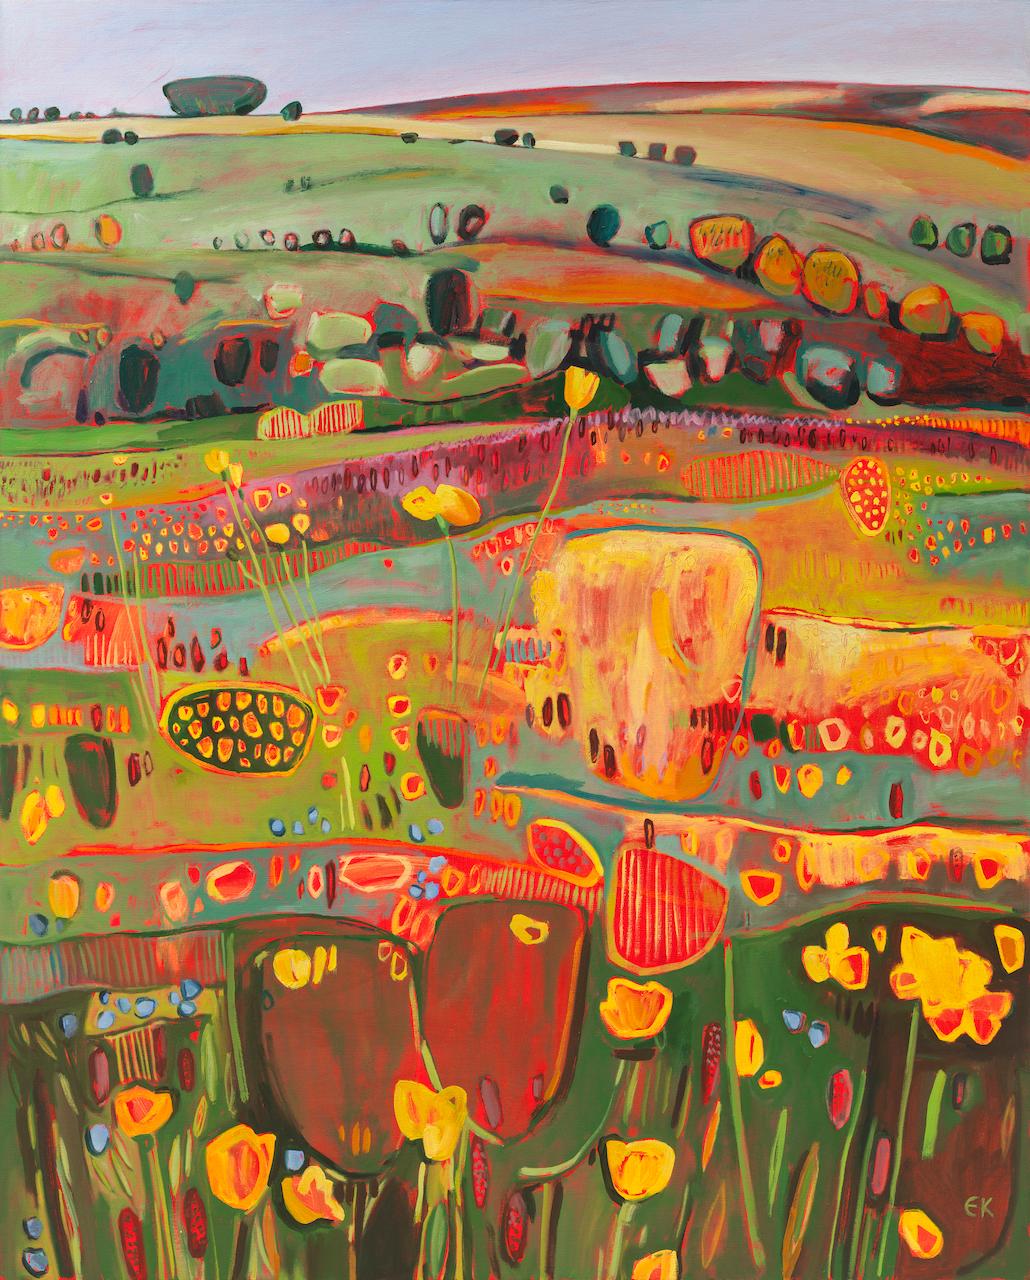 Elaine Kazimierczuk A glorious riot of colour! A meadow in full bloom – buttercups and speedwells, with rolling hills in the background. this is a semi-abstract interpretation of the sheer beauty of the English landscape. It’s big and bright and